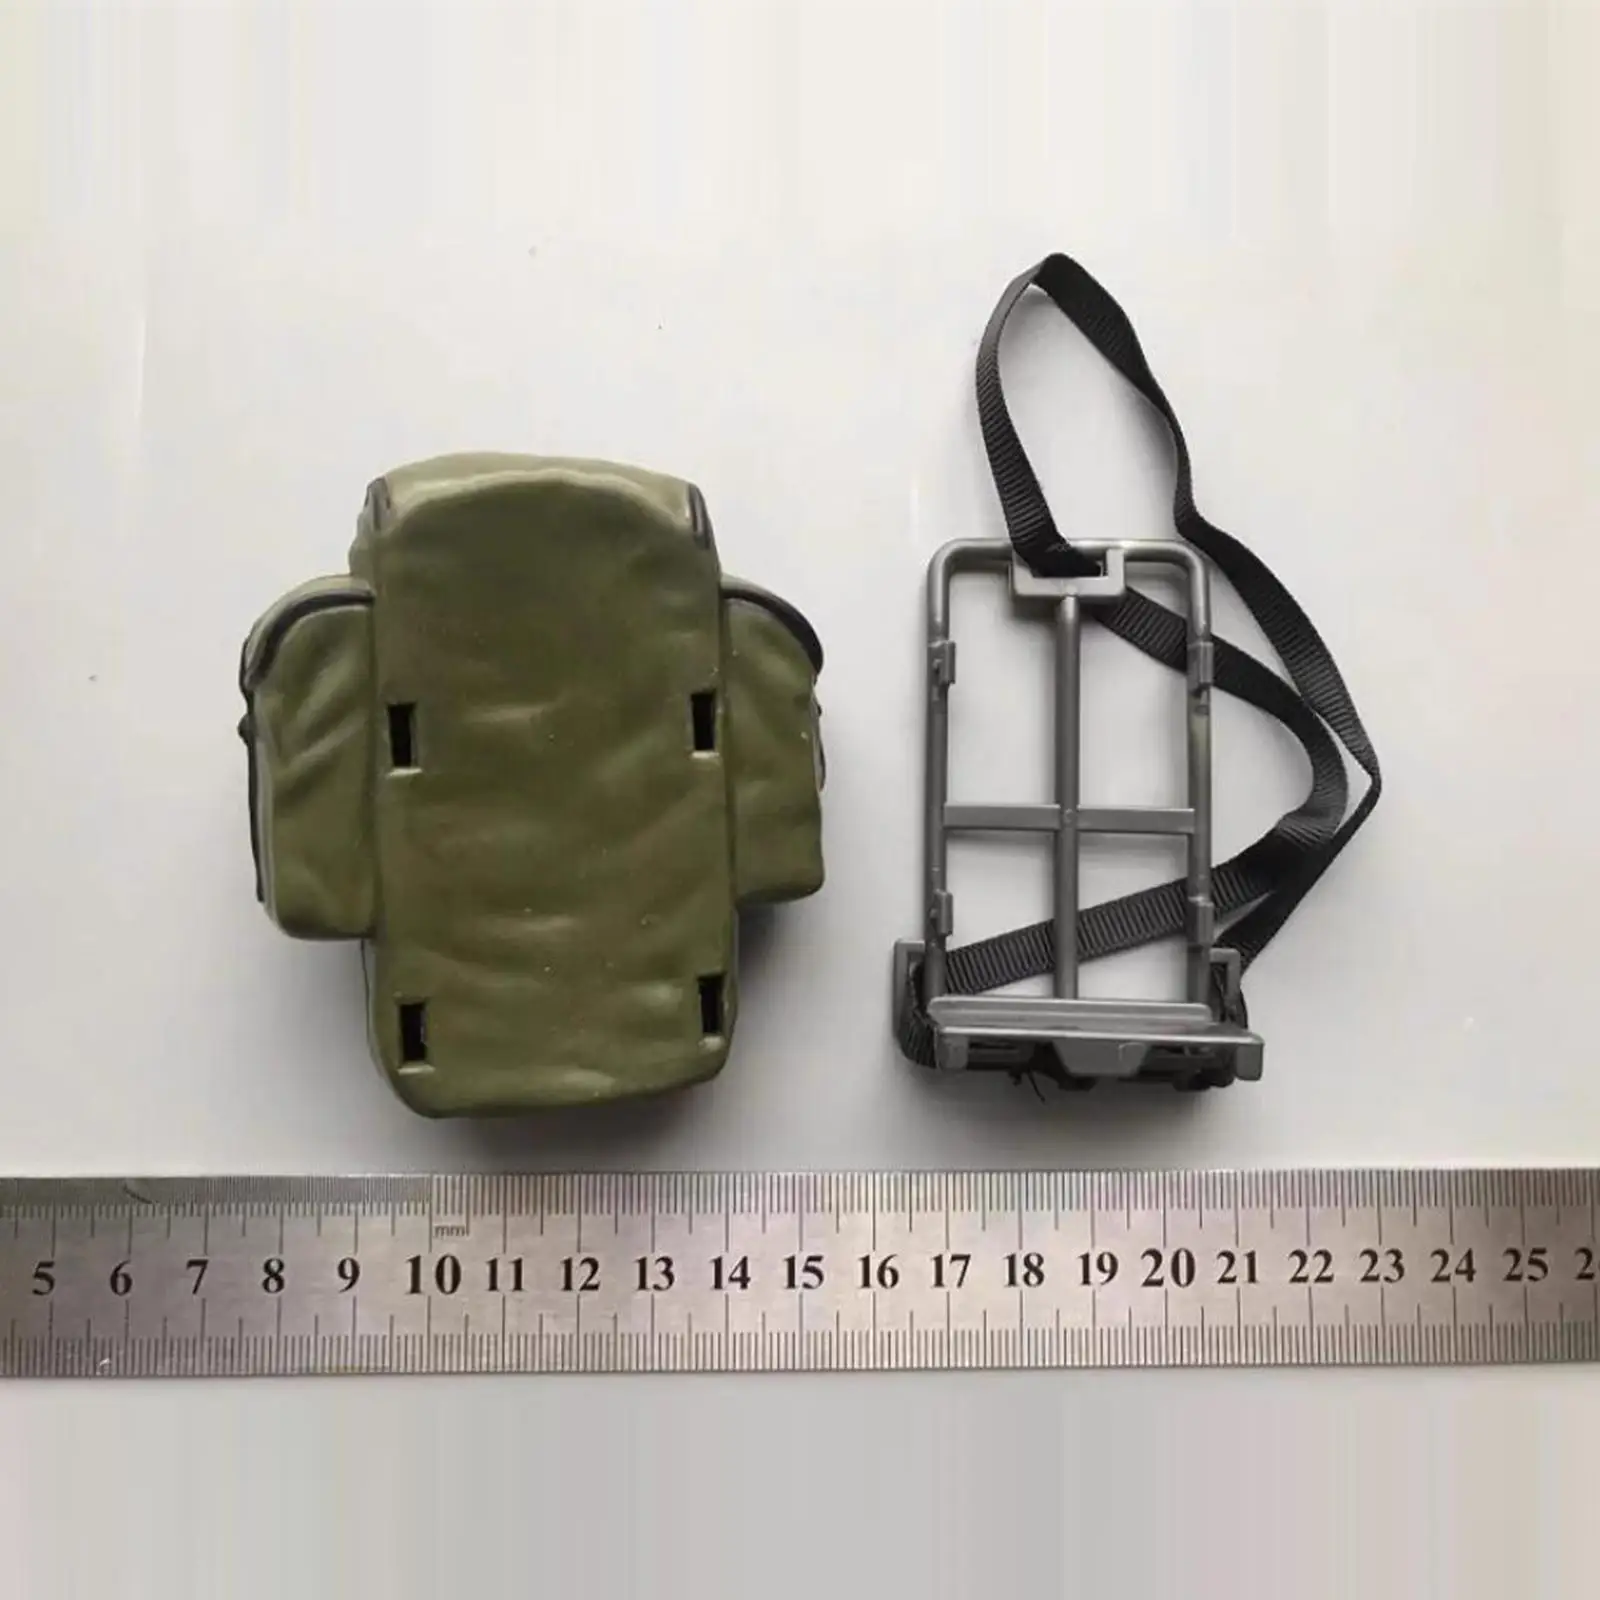 1:6 Scale Doll Jungle Backpack Miniature Bag Model for 12`` Action Figures